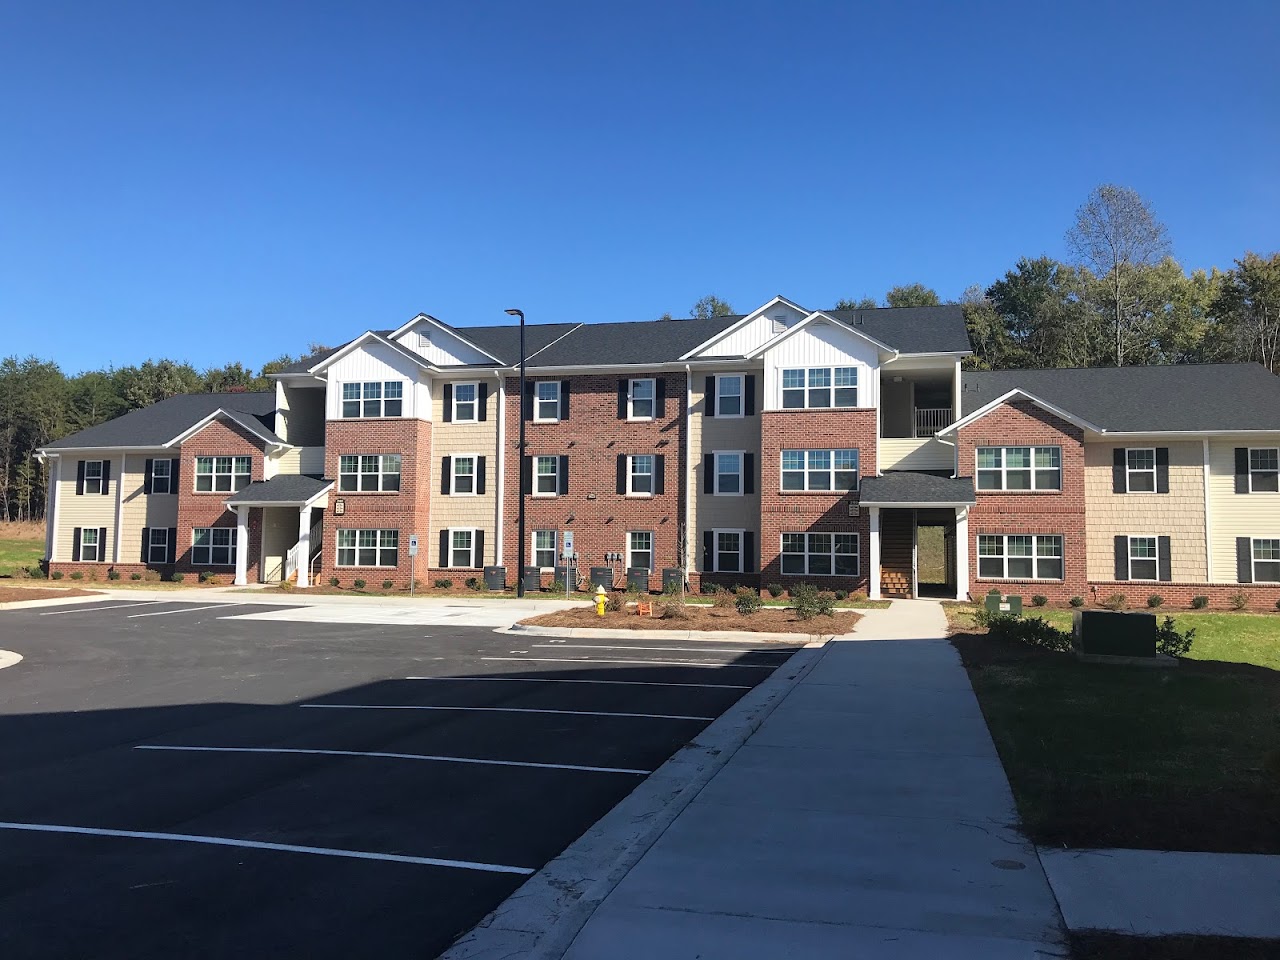 Photo of HIGHLAND PARK. Affordable housing located at 2110 17TH AVE NE HICKORY, NC 28601